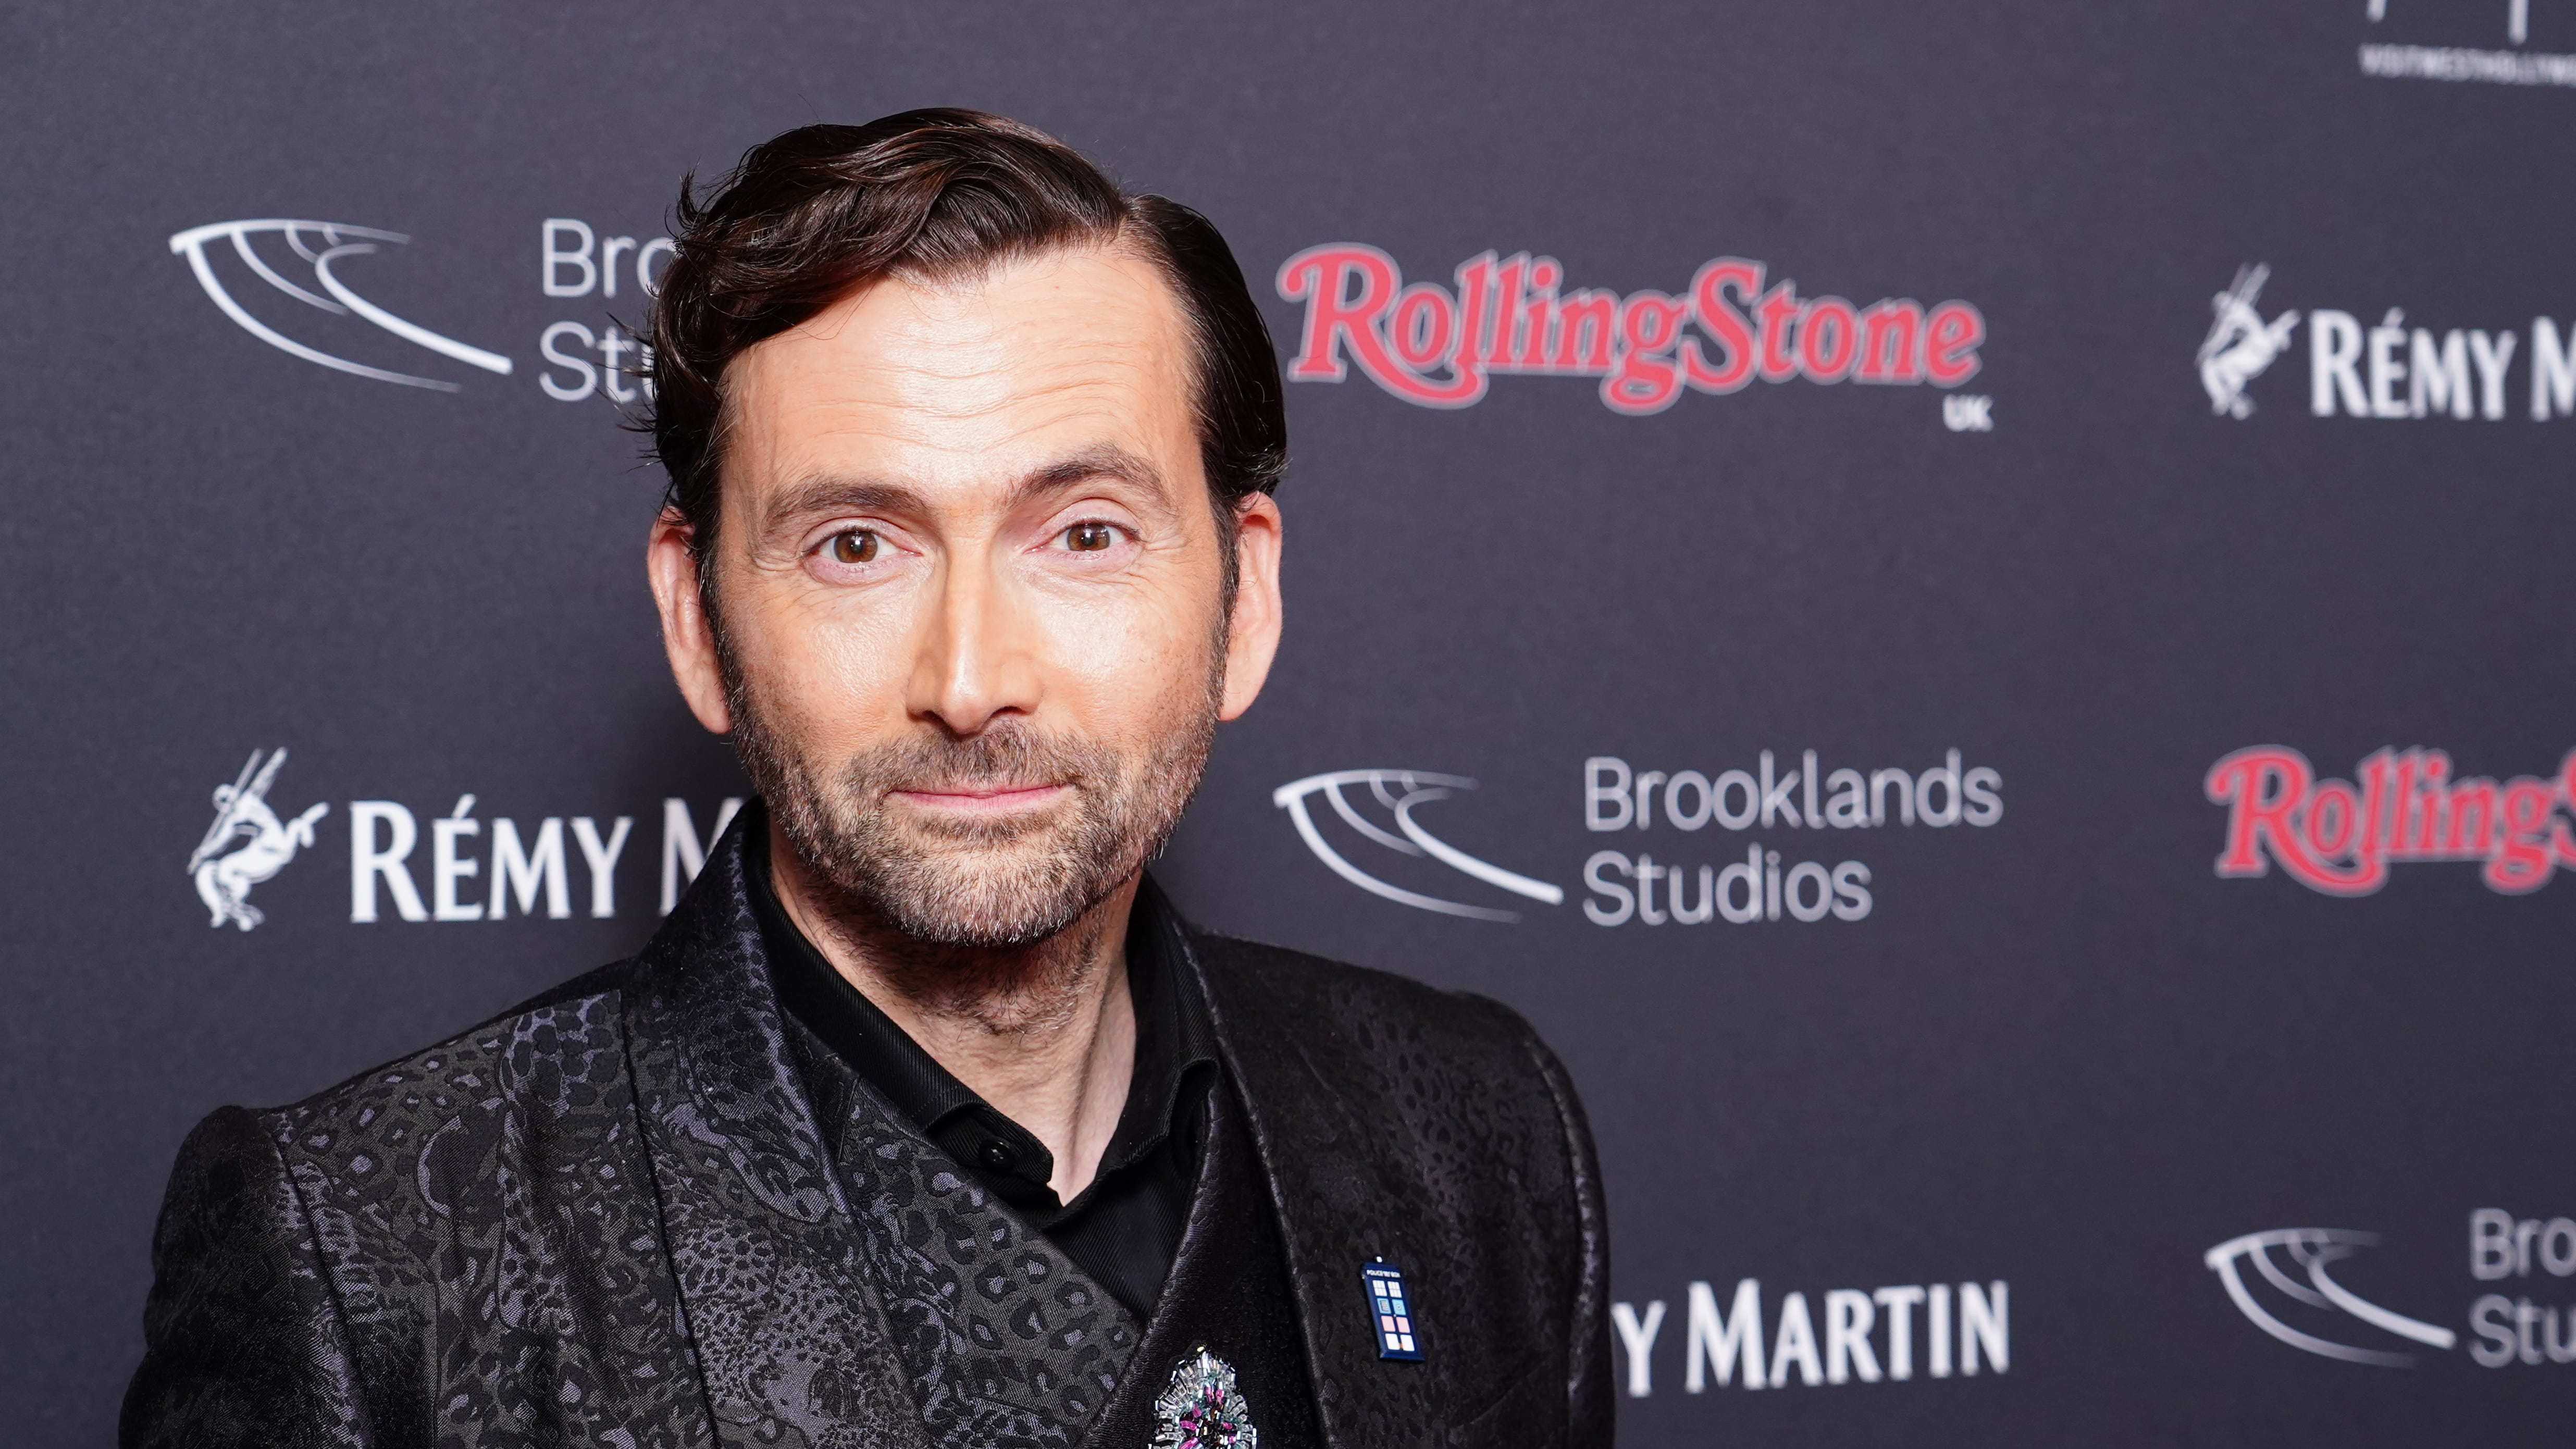 Doctor Who star David Tennant is the latest casting announcement